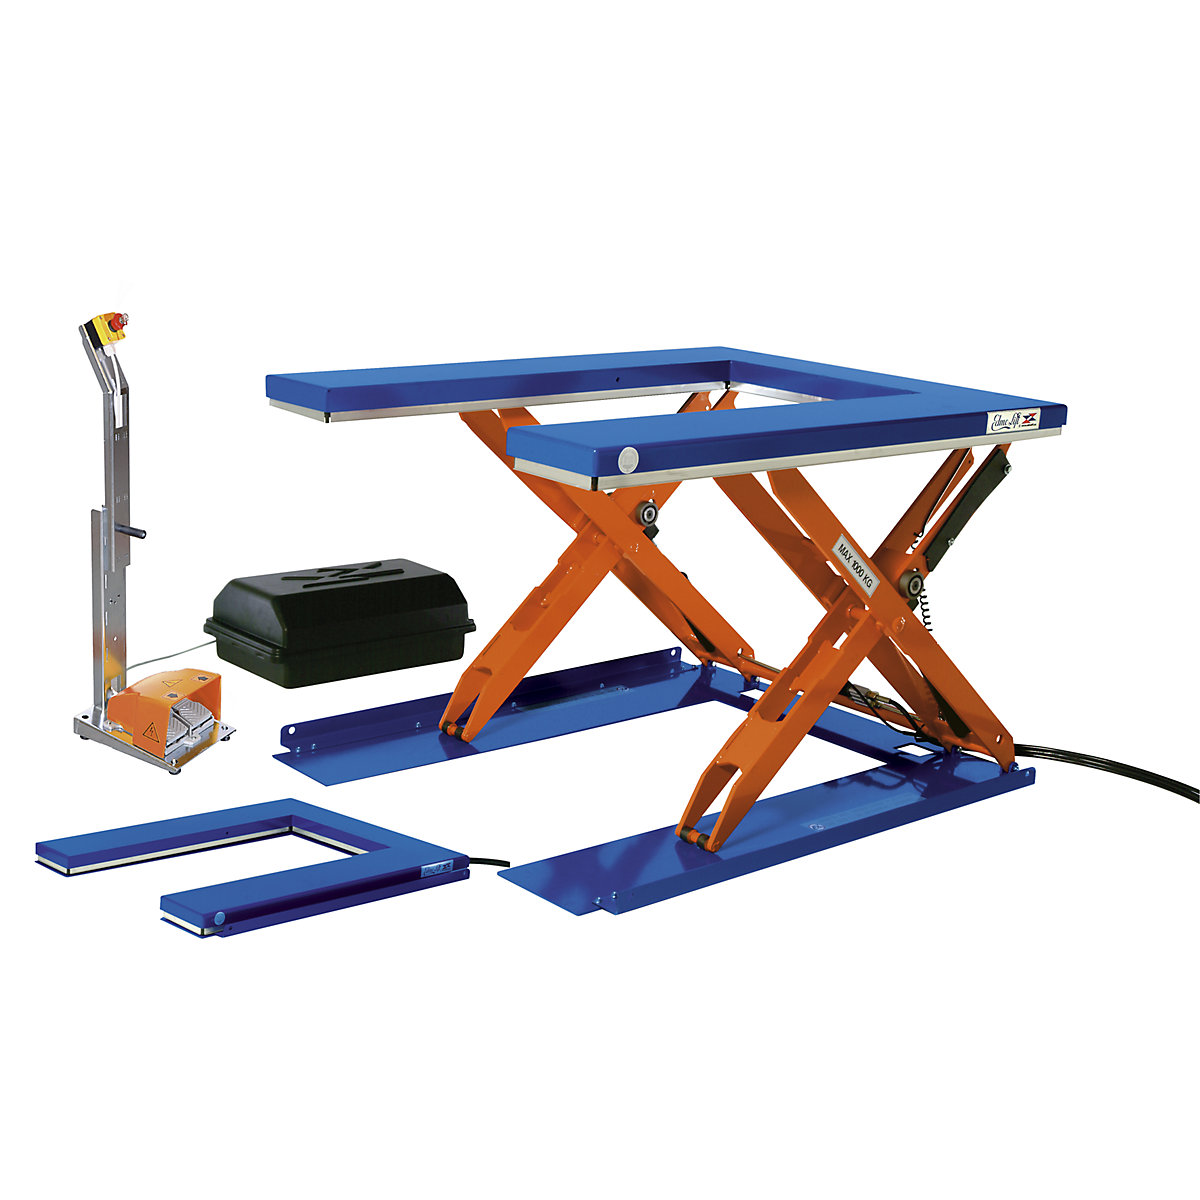 Low profile lift table – Edmolift, LxW 1350 x 1080 mm, lifting range up to 900 mm, U-shaped platform, 400 V, with foot operated control unit